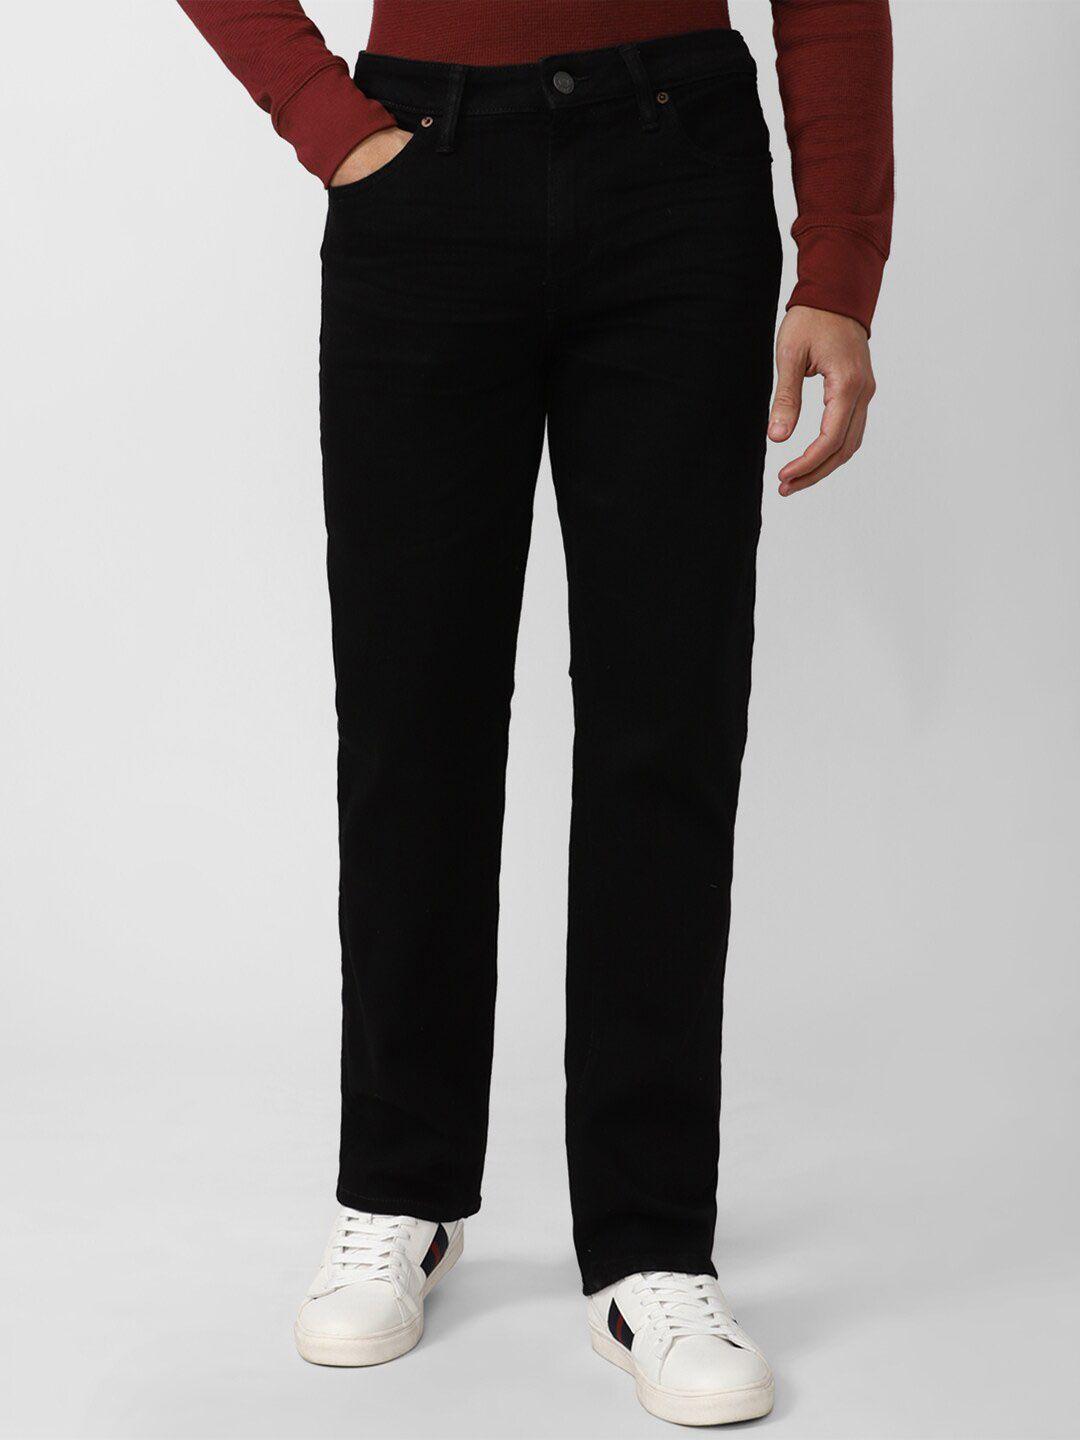 american-eagle-outfitters-men-black-slim-fit-jeans